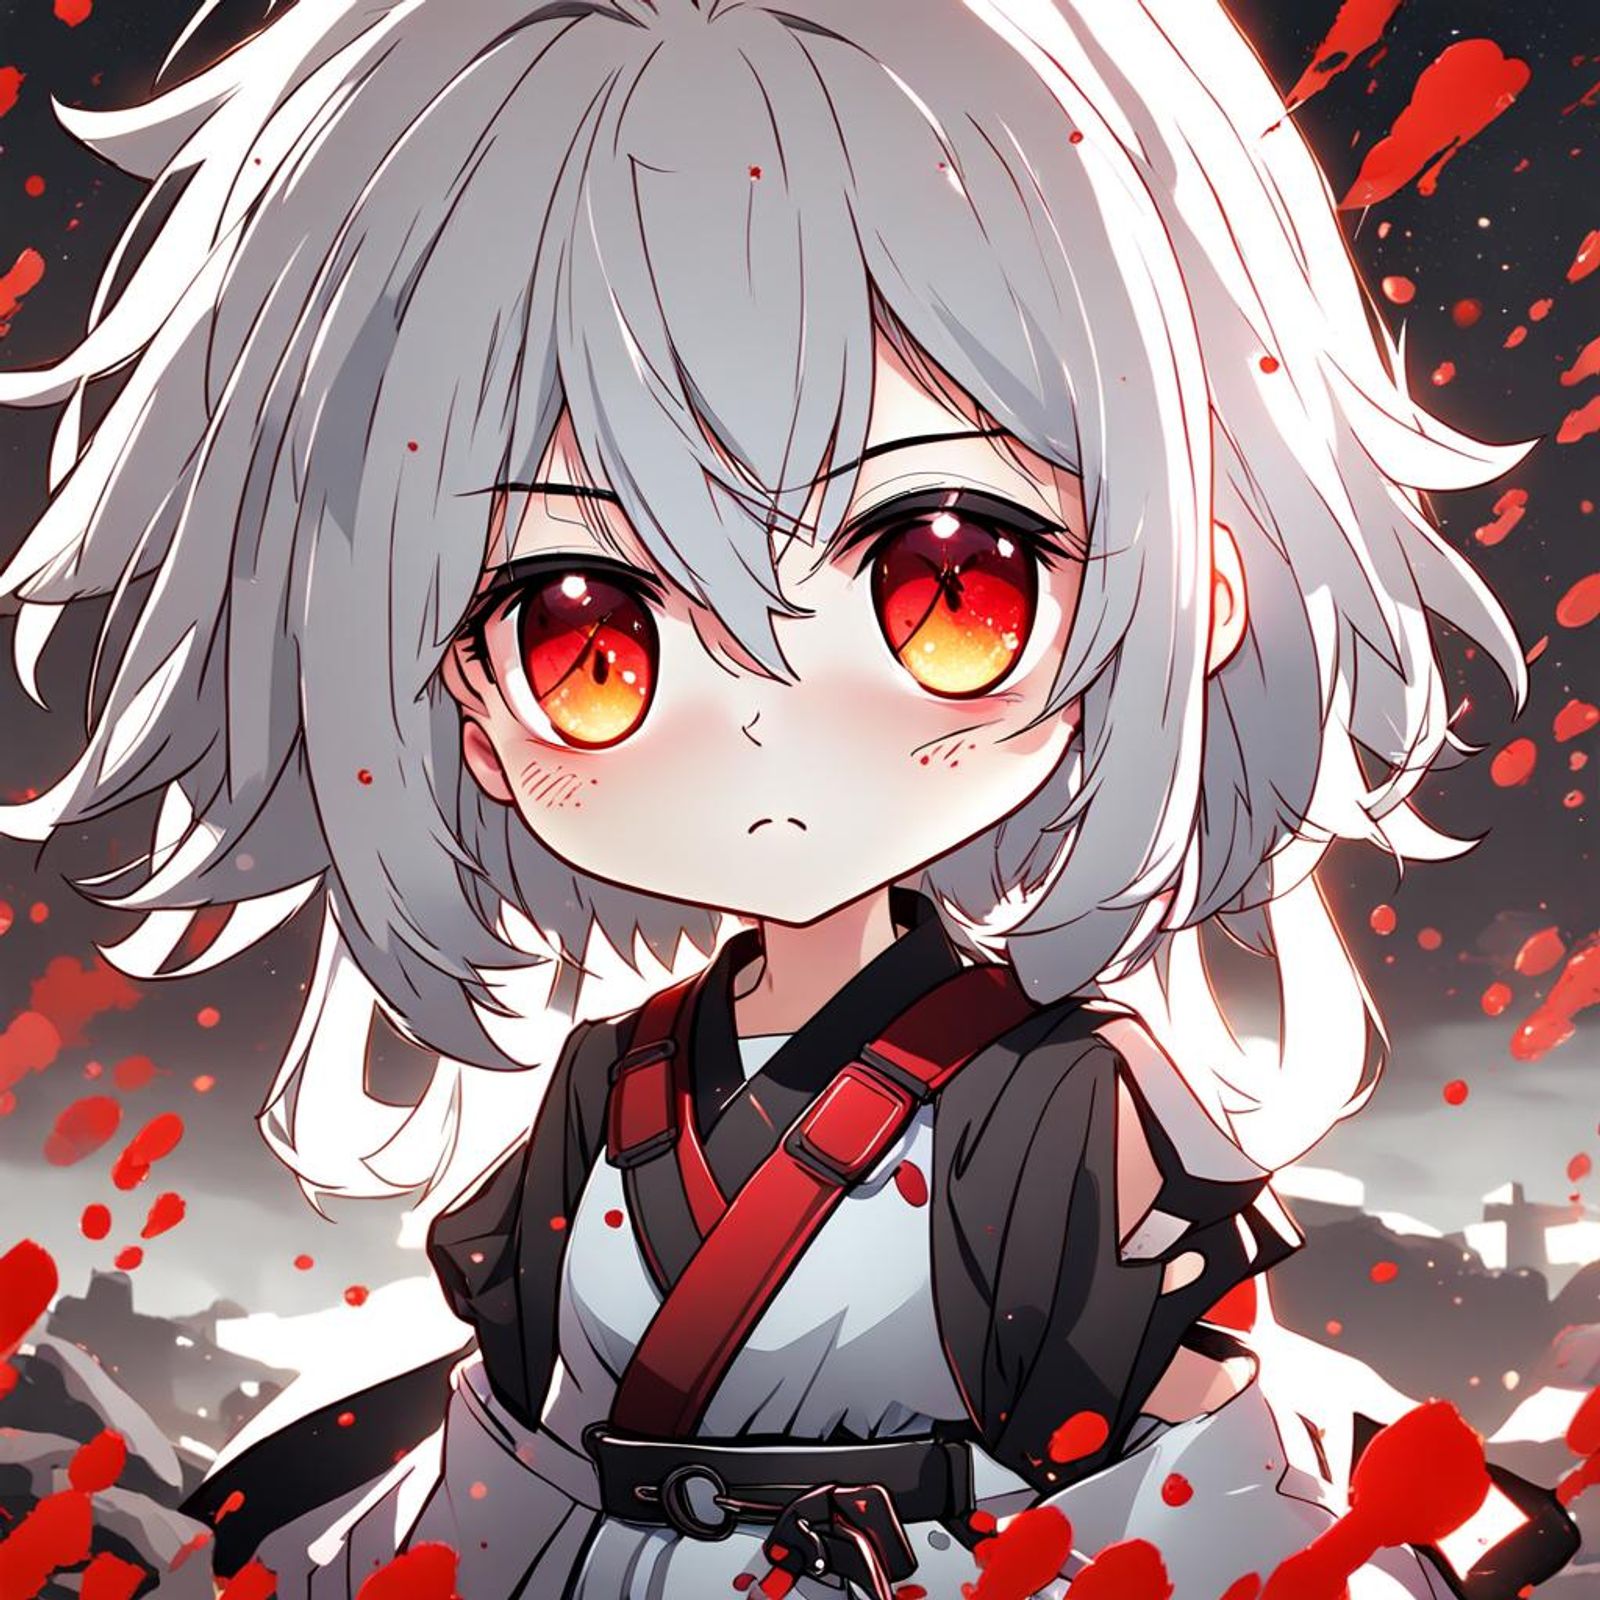 a chibi anime girl, moe style, with light white hair with good lighting ...